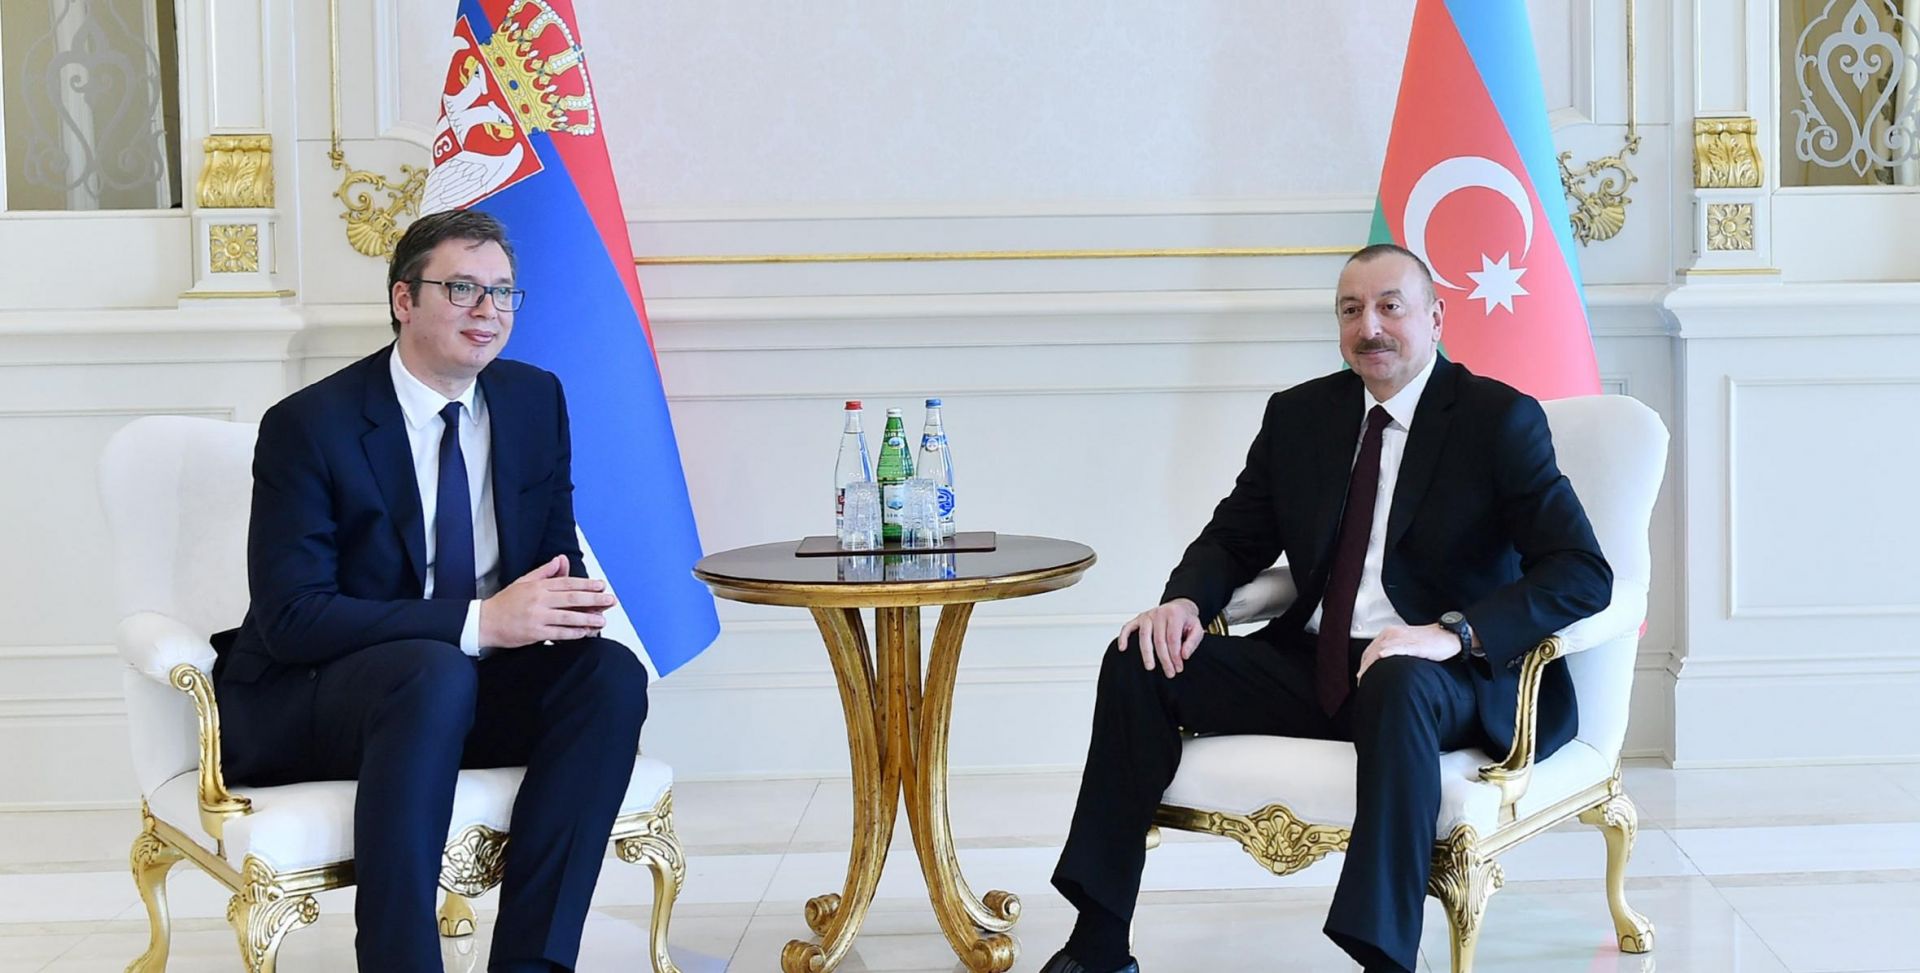 Serbia to purchase electricity from Azerbaijan, set to further deepen ties